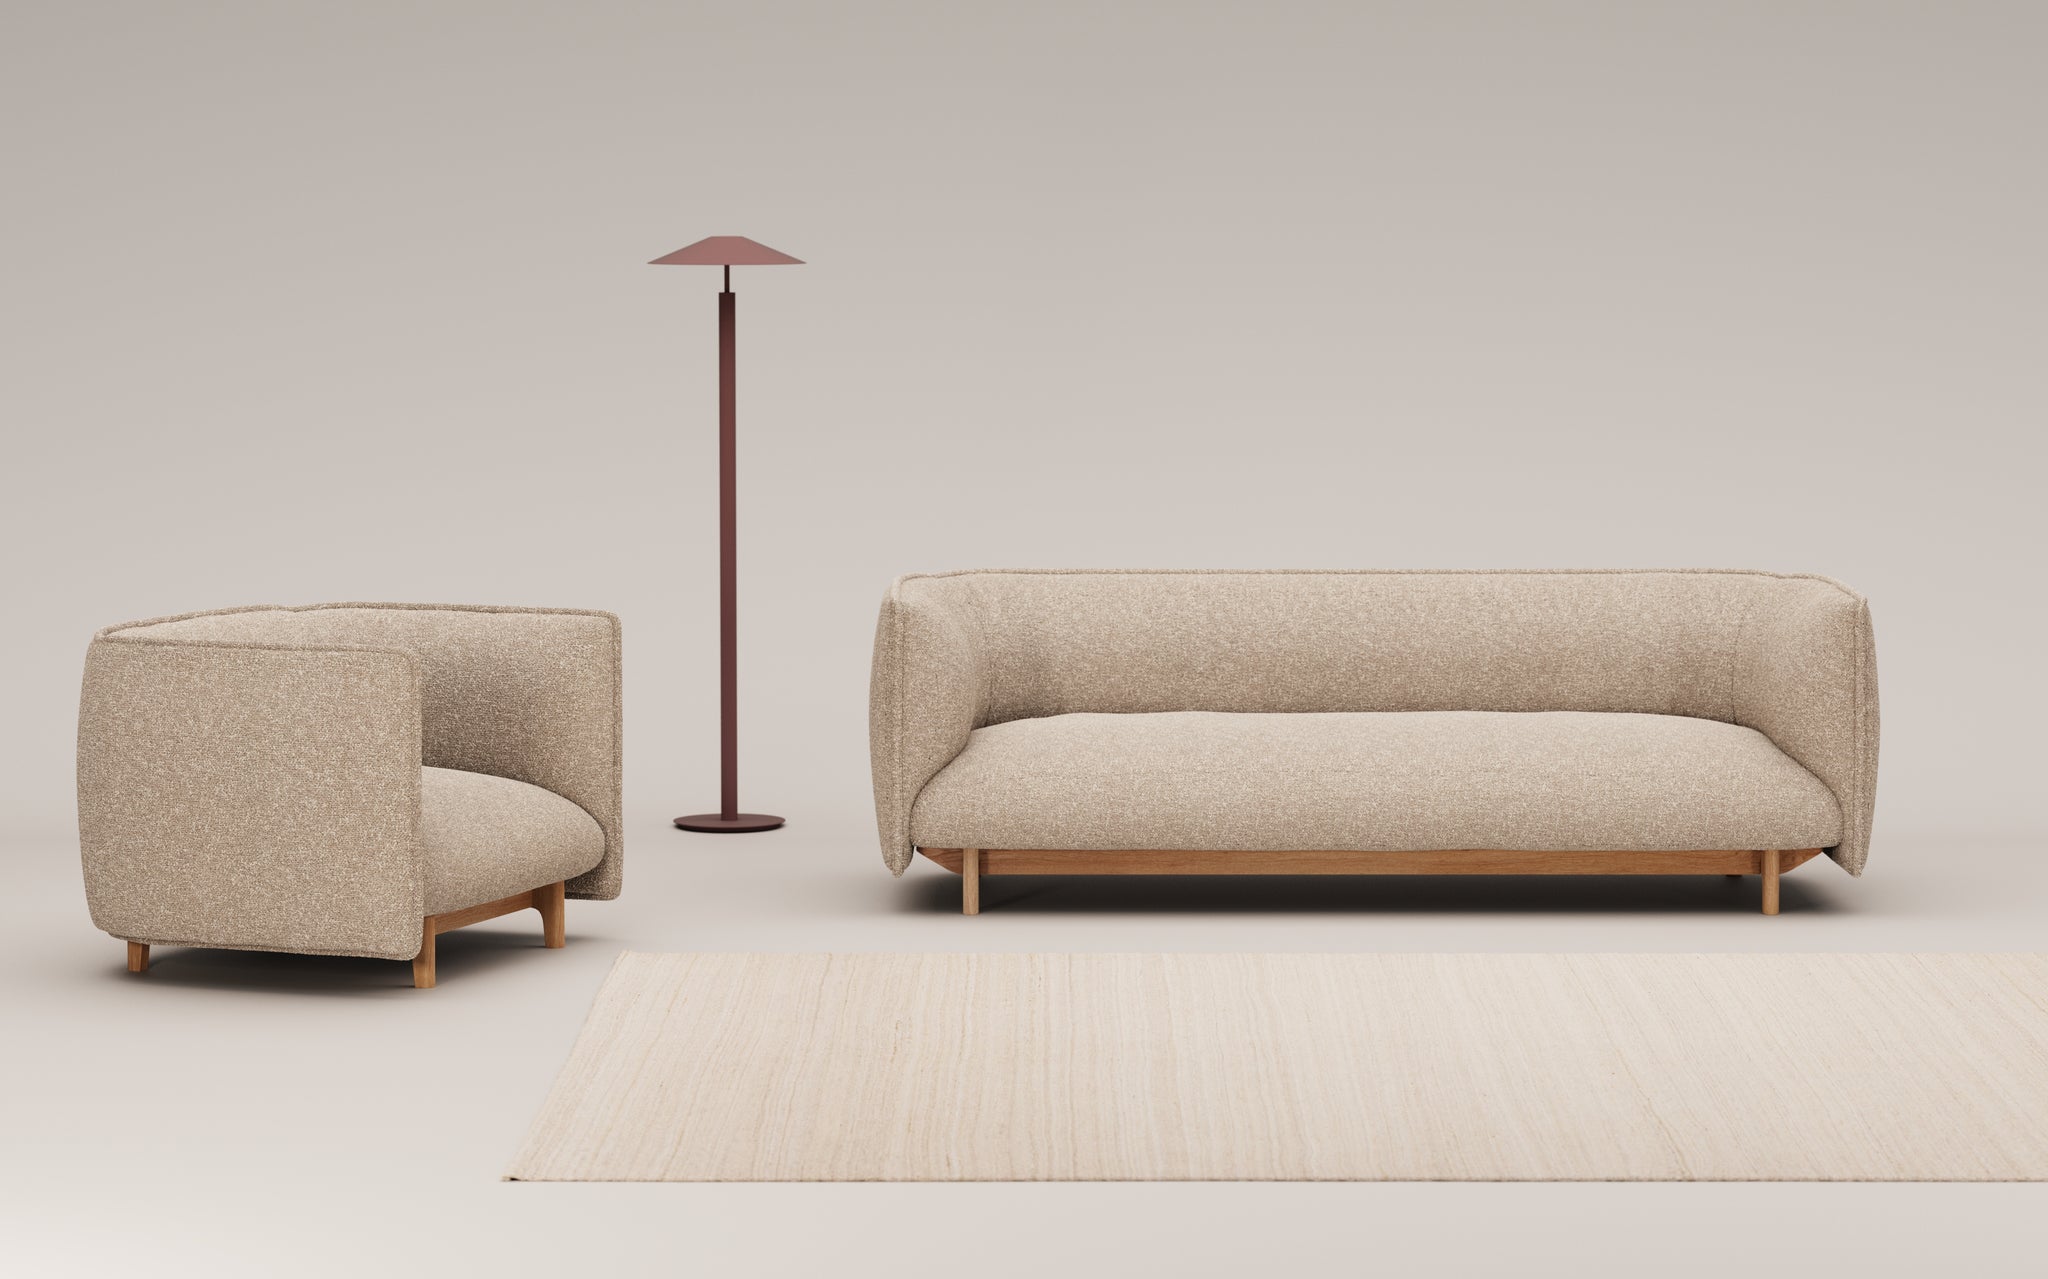 Beam collection. A luxurious and comfortable sofa. Handmade designer furniture. 